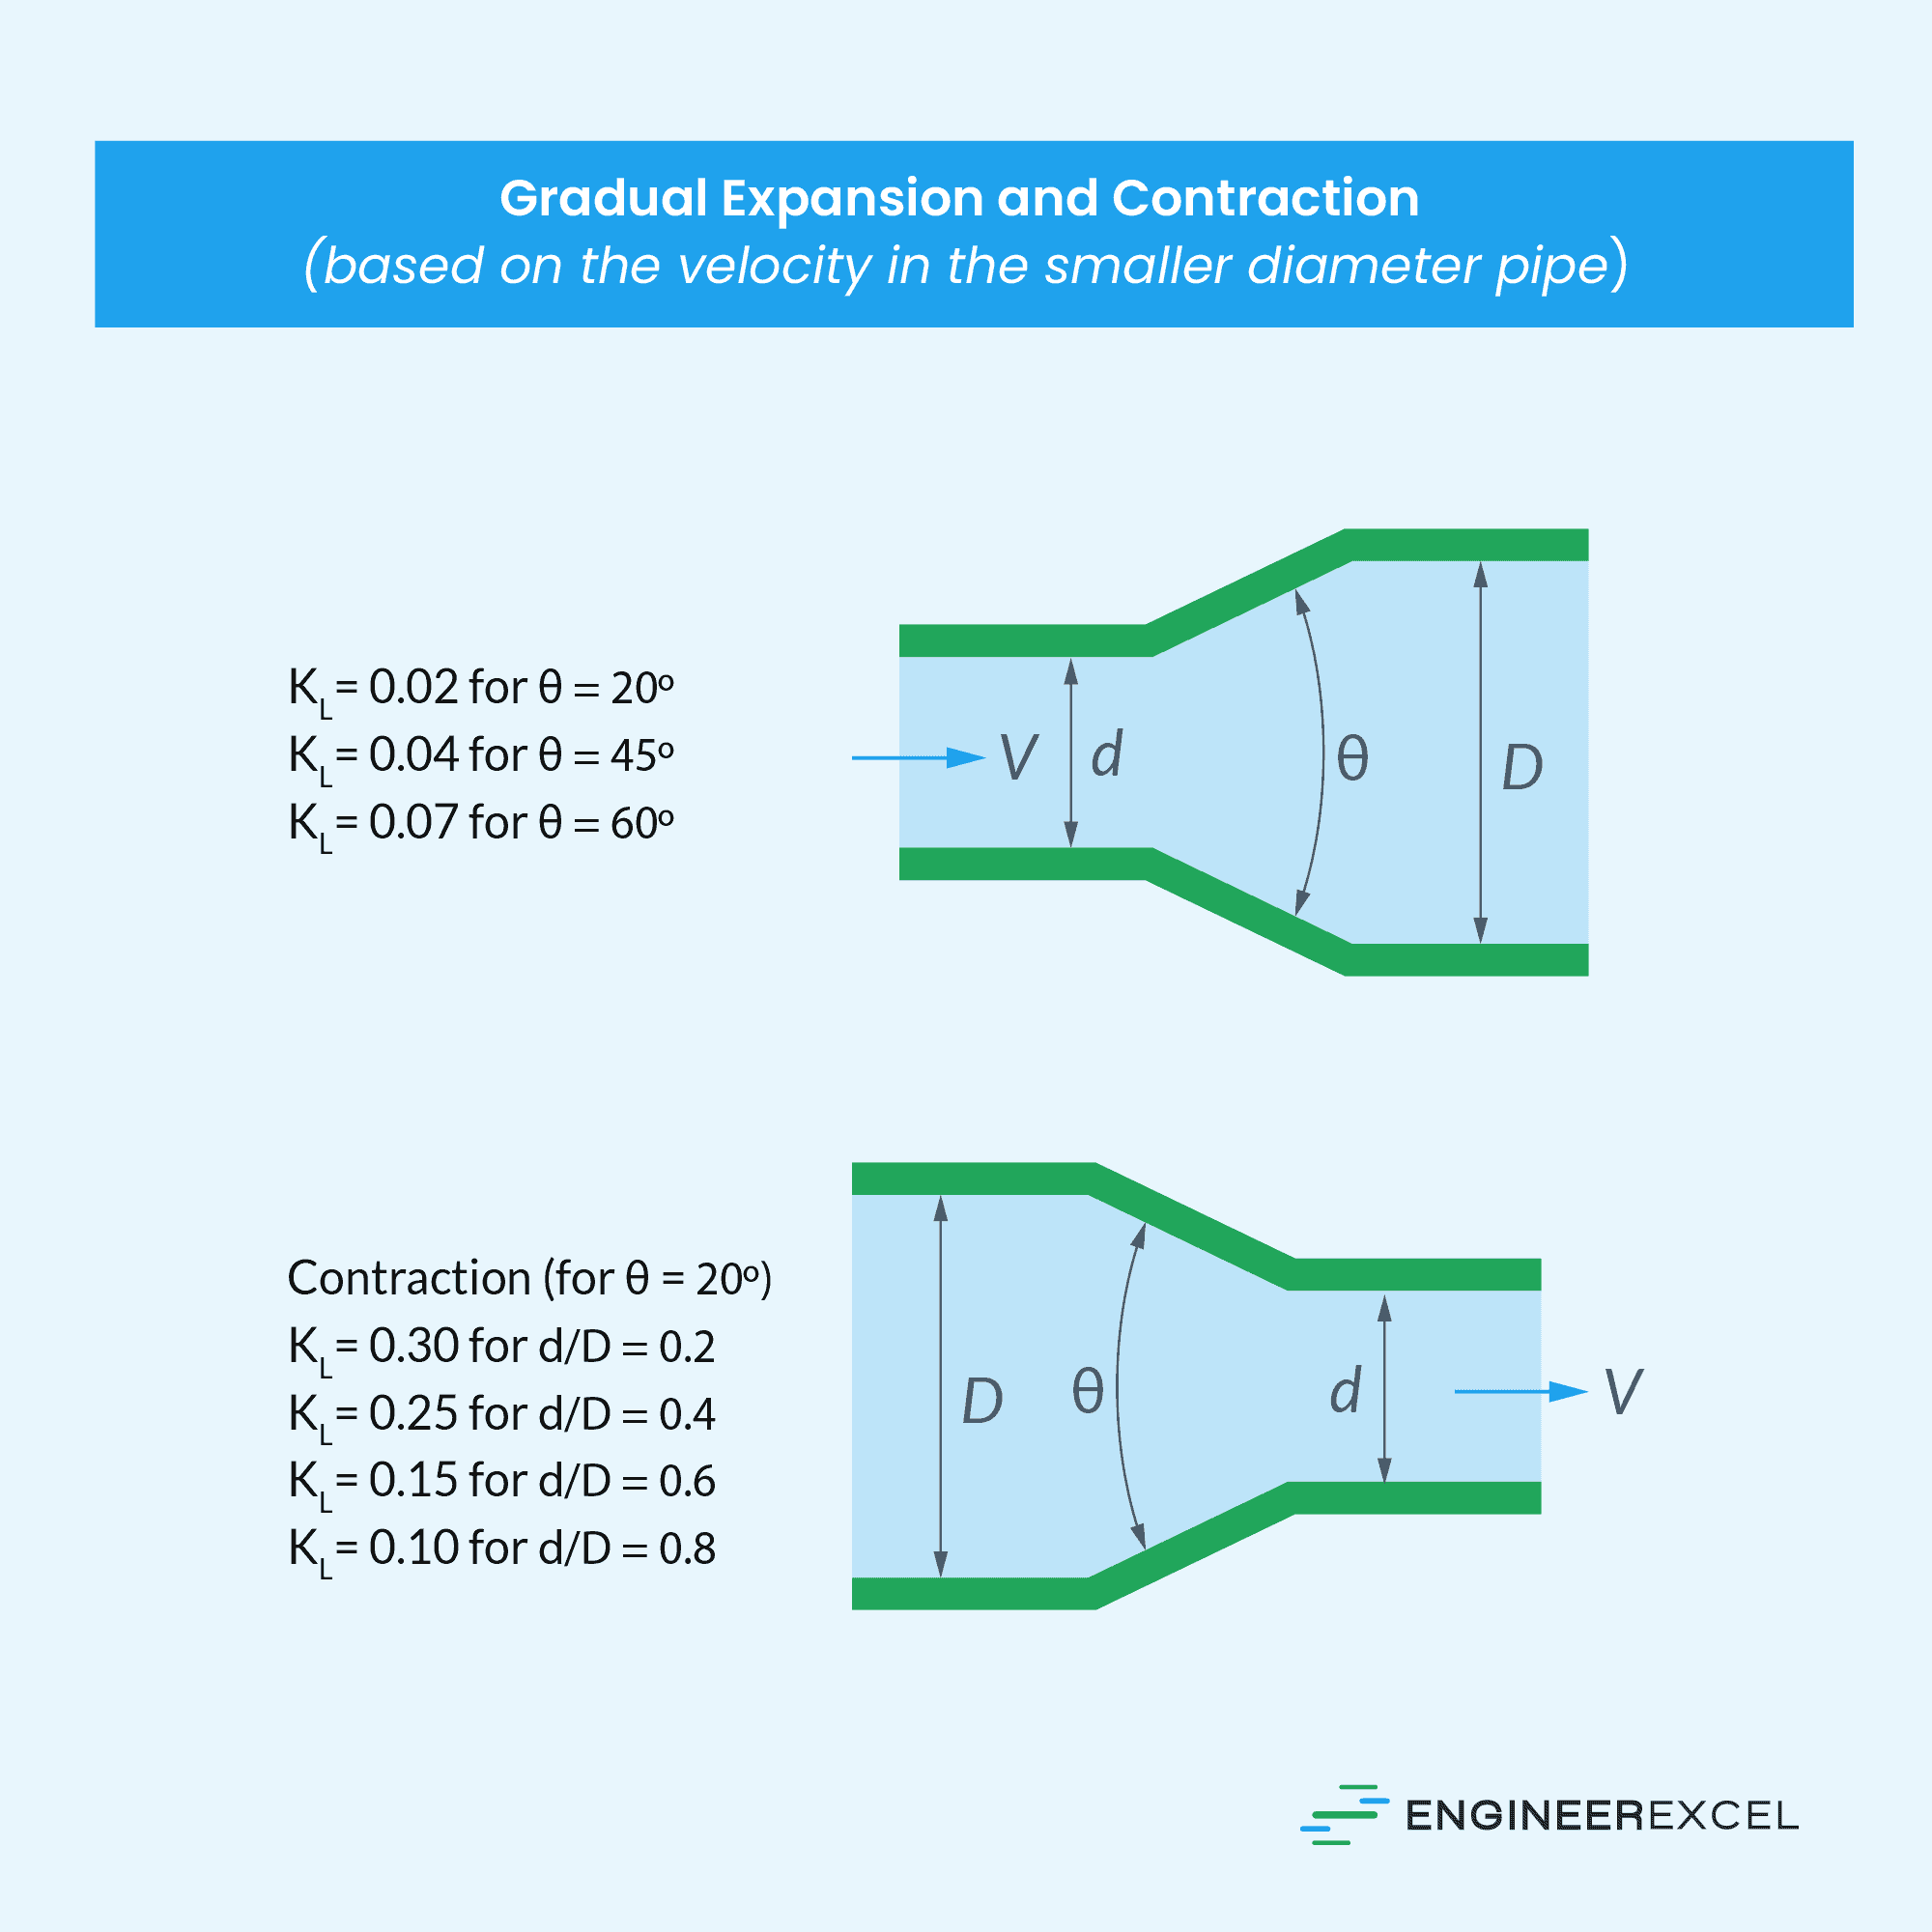 Loss coefficients of gradual expansion and contraction